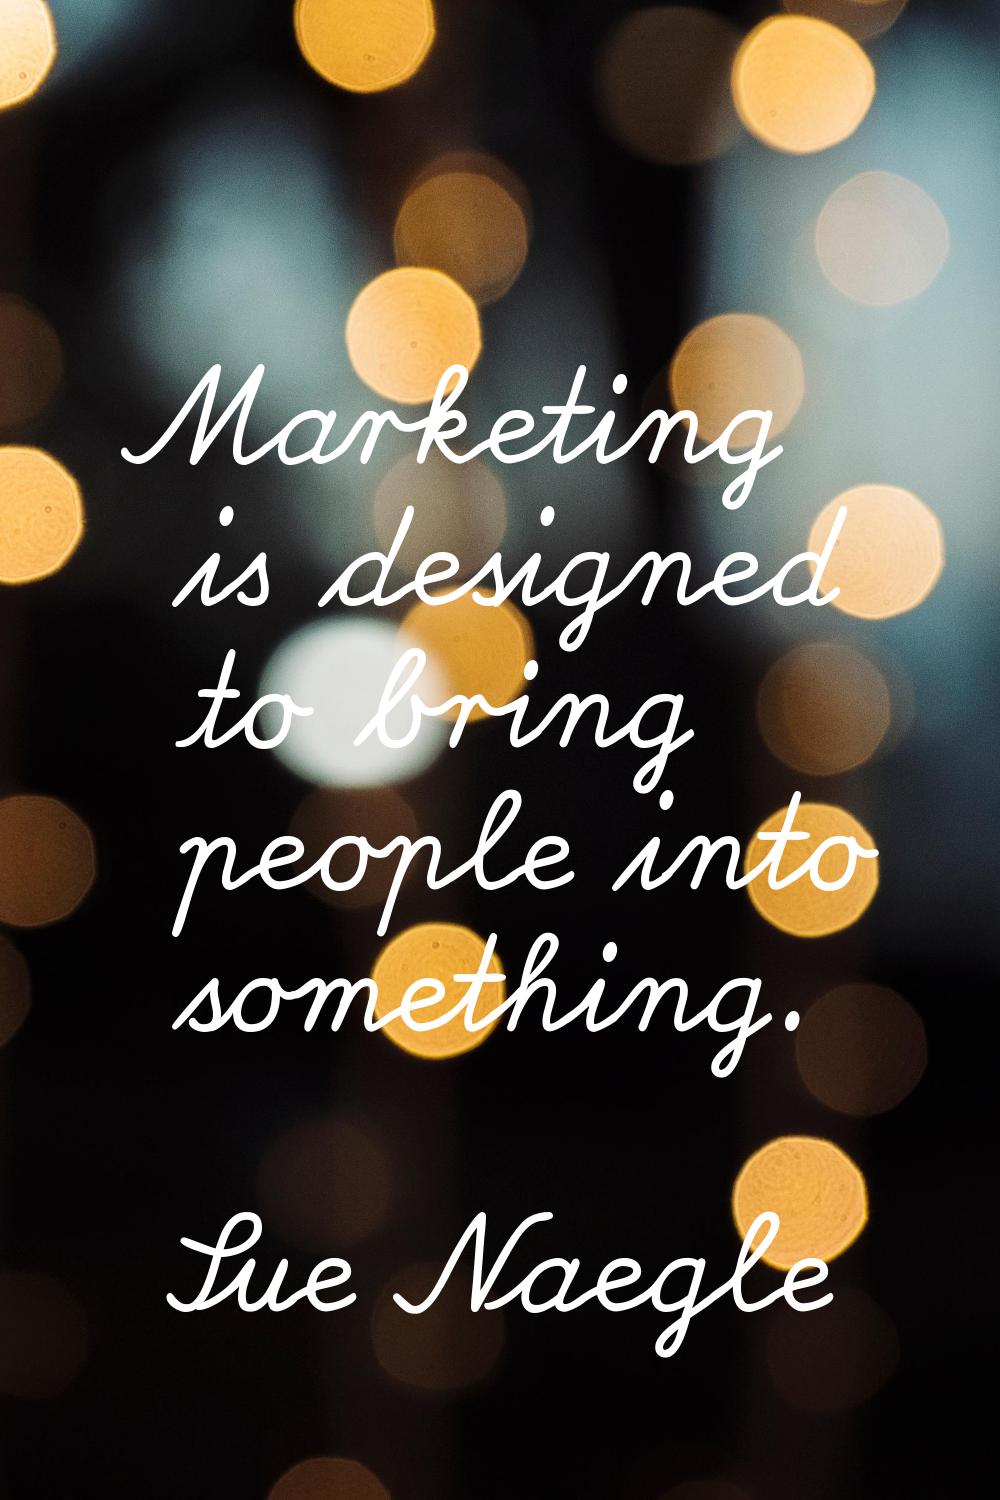 Marketing is designed to bring people into something.